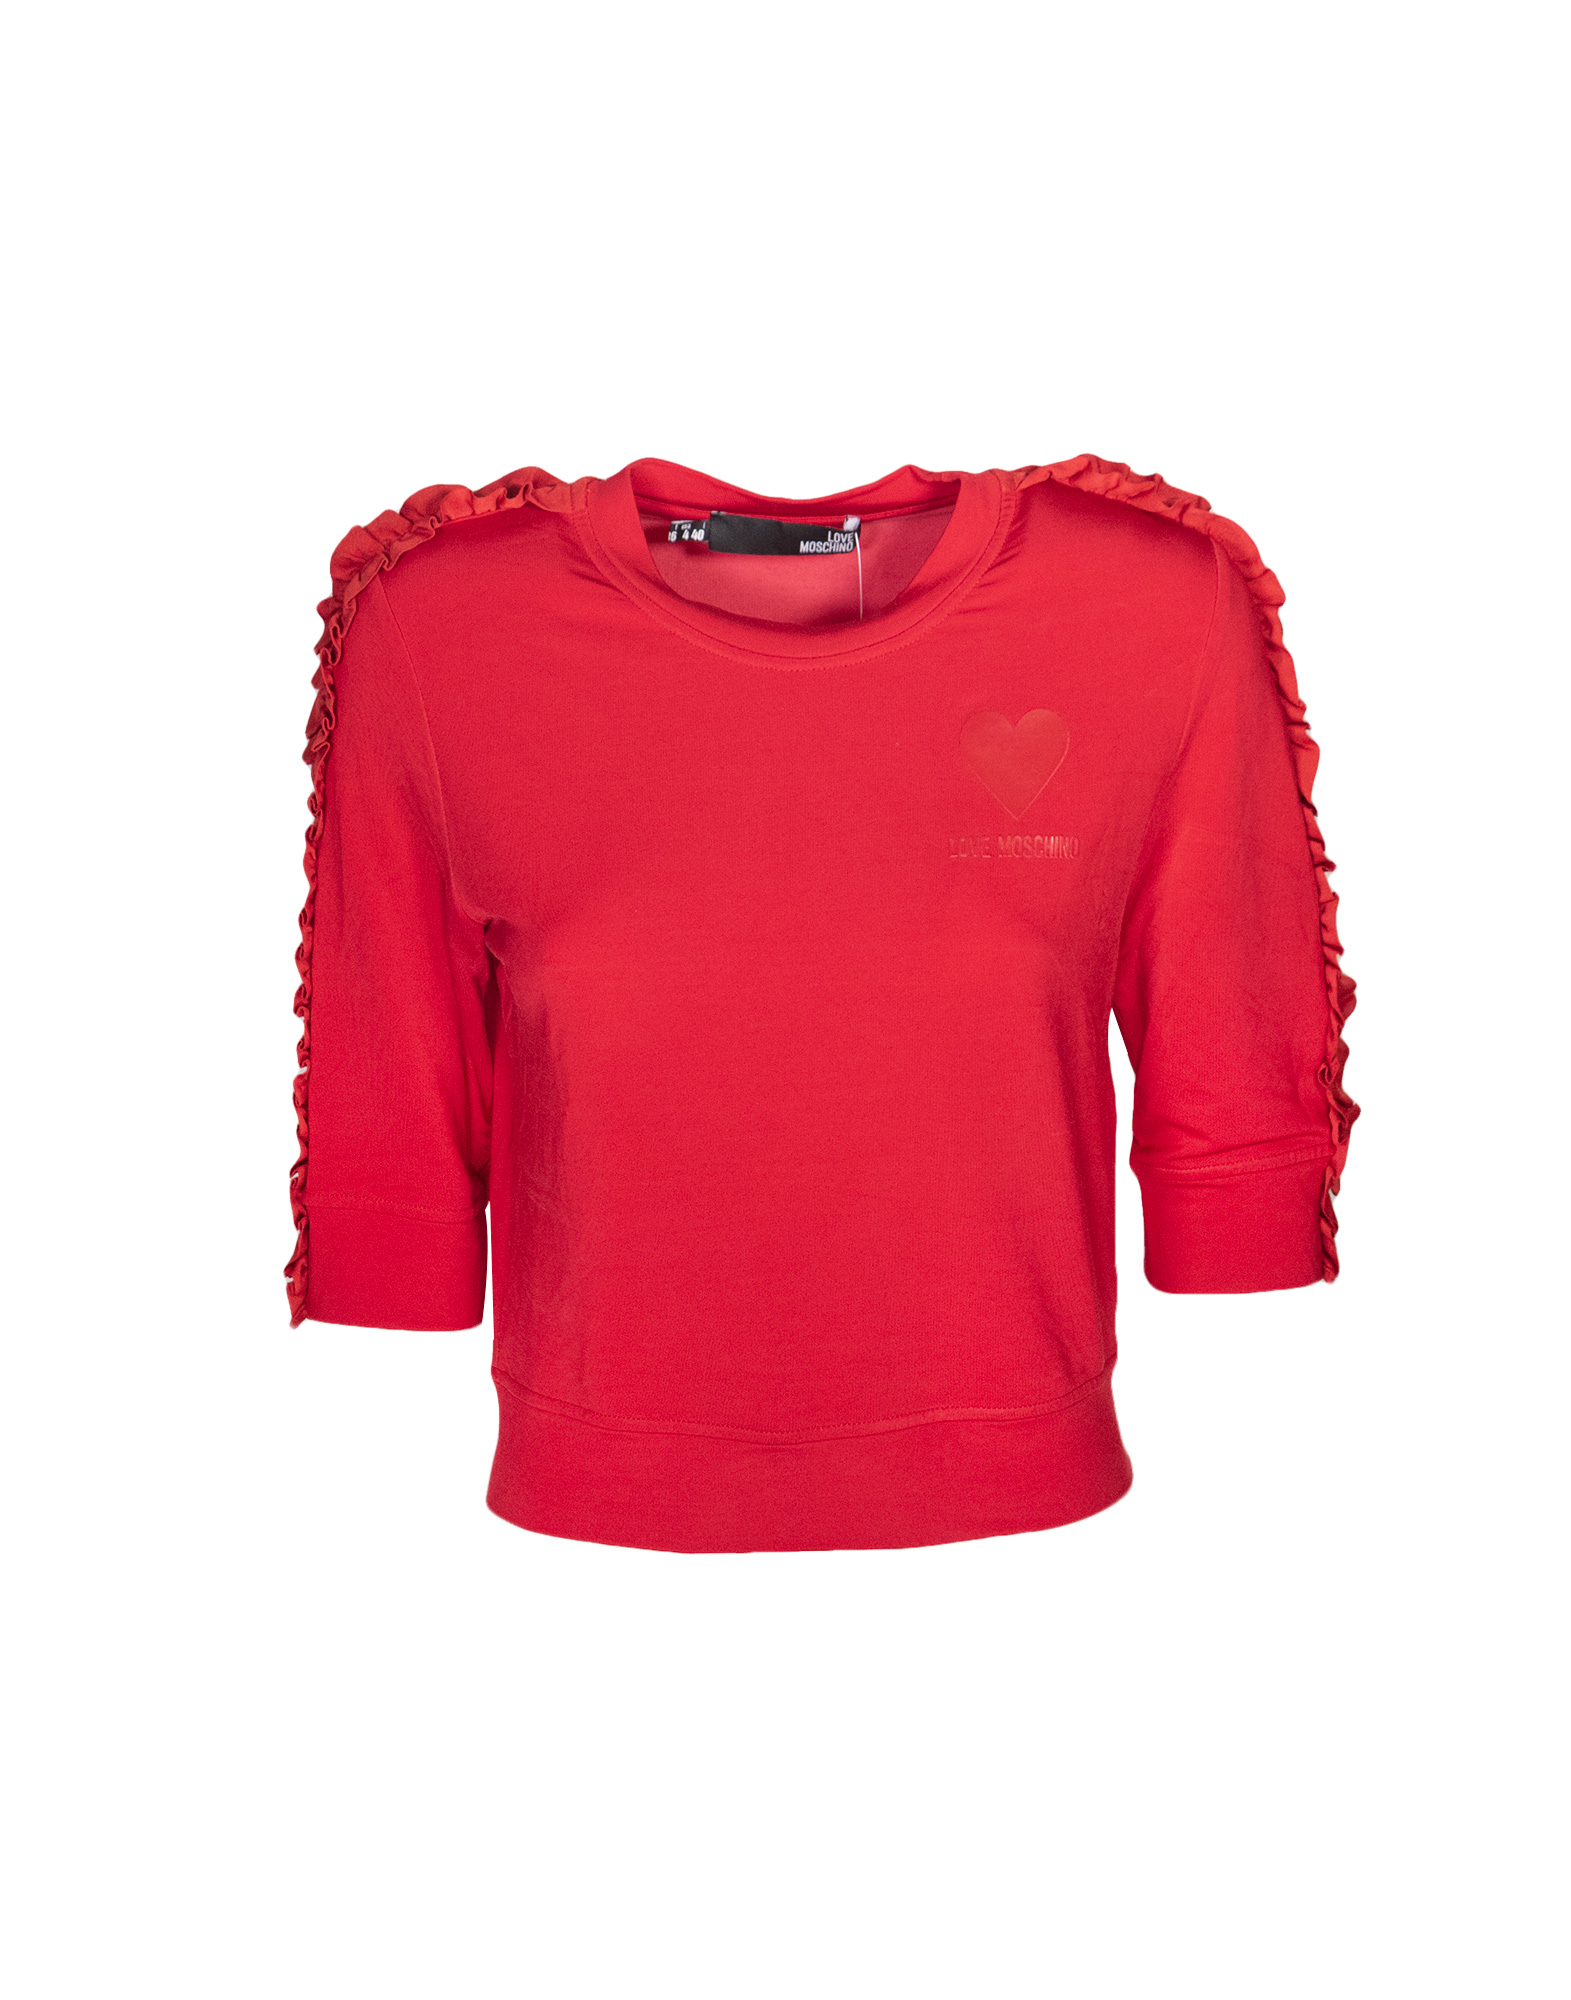 Love Moschino - Red long-sleeved sweater